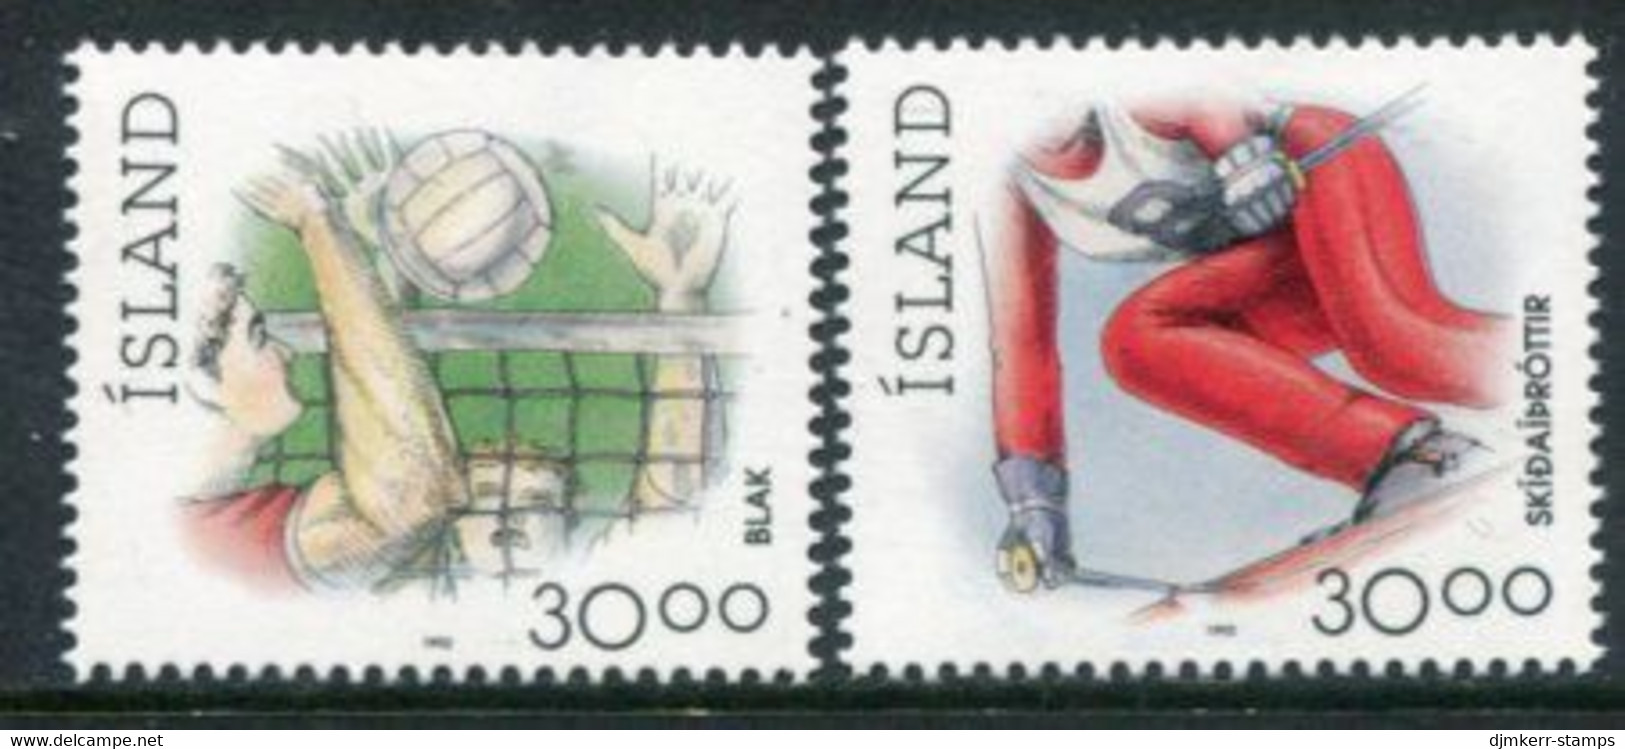 ICELAND 1992 Sport: Volleyball And Skiing   MNH / **.  Michel 760-61 - Neufs